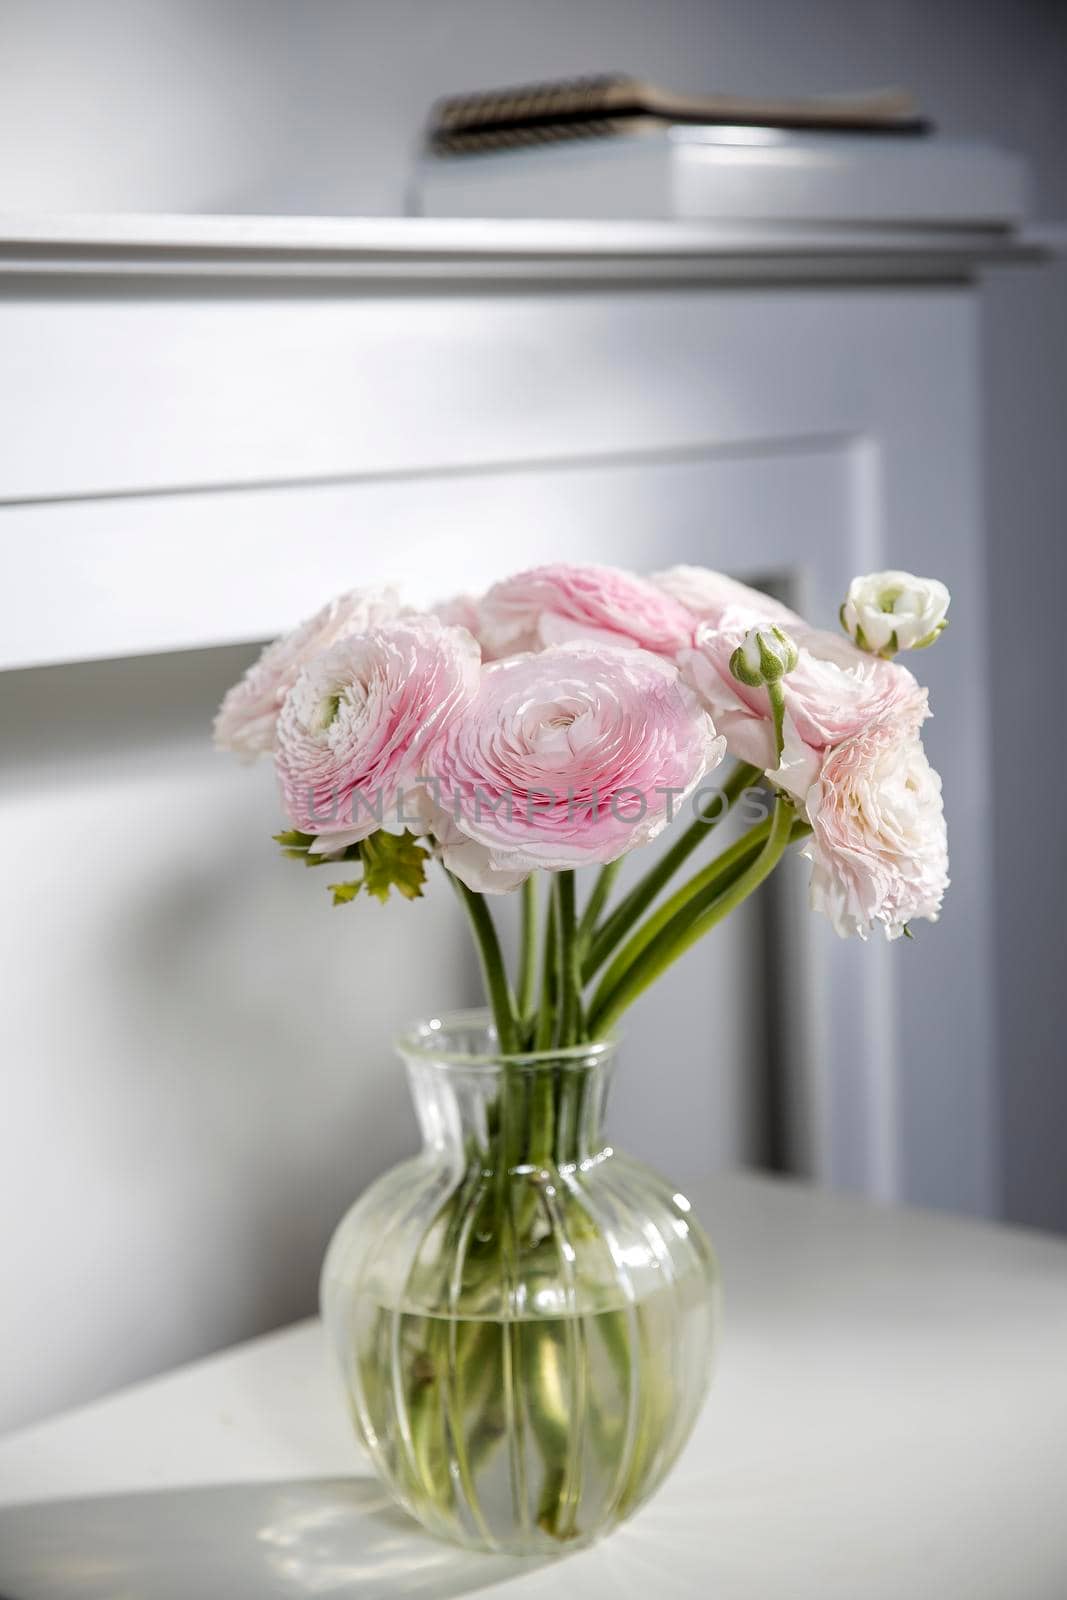 the bouquet of pale pink Persian buttercups in the glass vase on the table against the background of the fireplace.